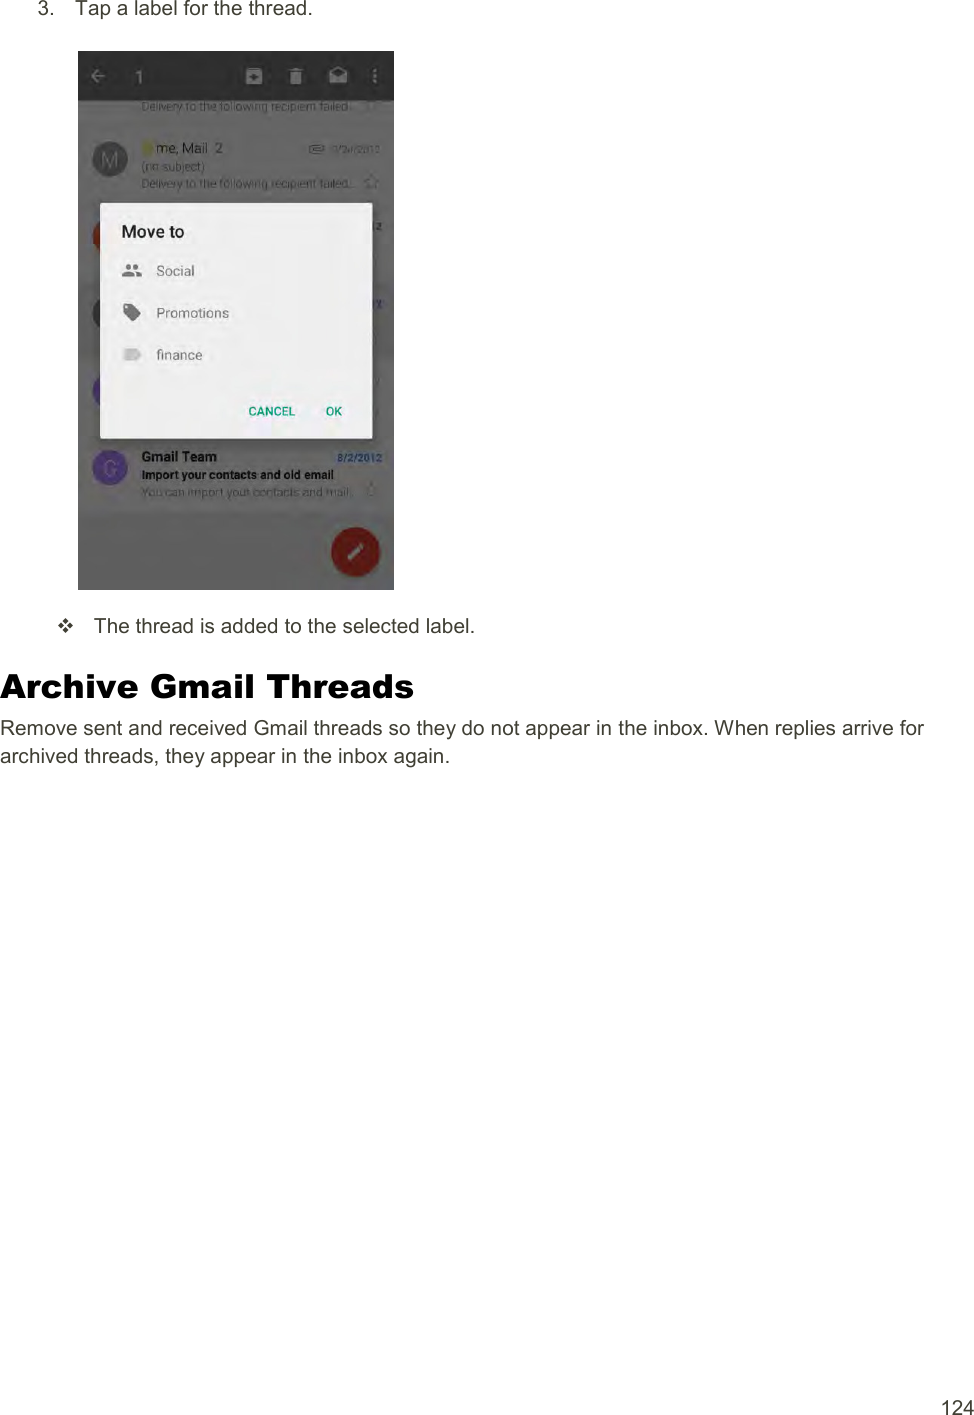  124 3.  Tap a label for the thread.     The thread is added to the selected label. Archive Gmail Threads Remove sent and received Gmail threads so they do not appear in the inbox. When replies arrive for archived threads, they appear in the inbox again. 